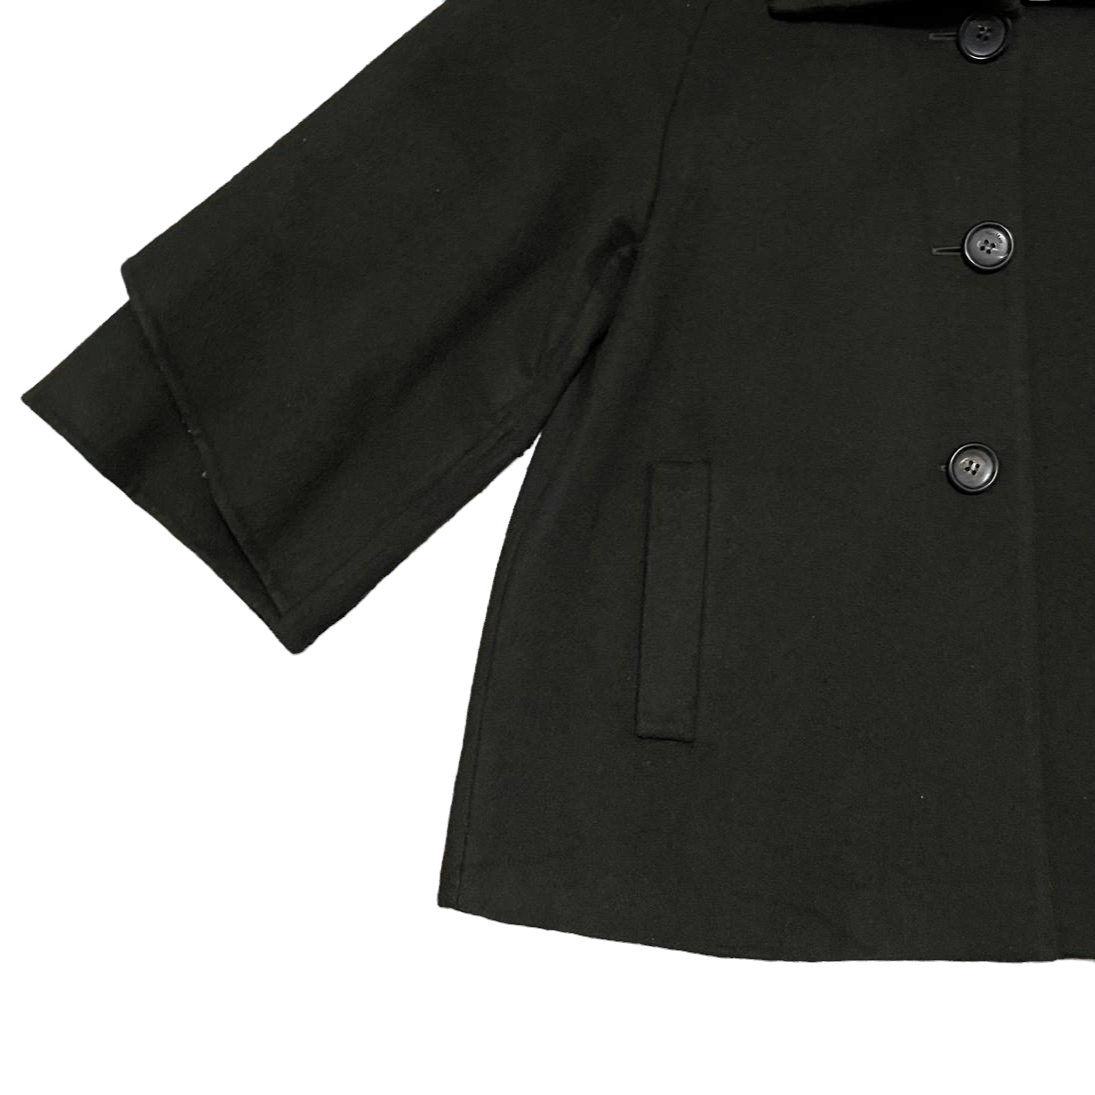 Archival Clothing - Archive Max Mara Made in Italy Wool Coat - 3